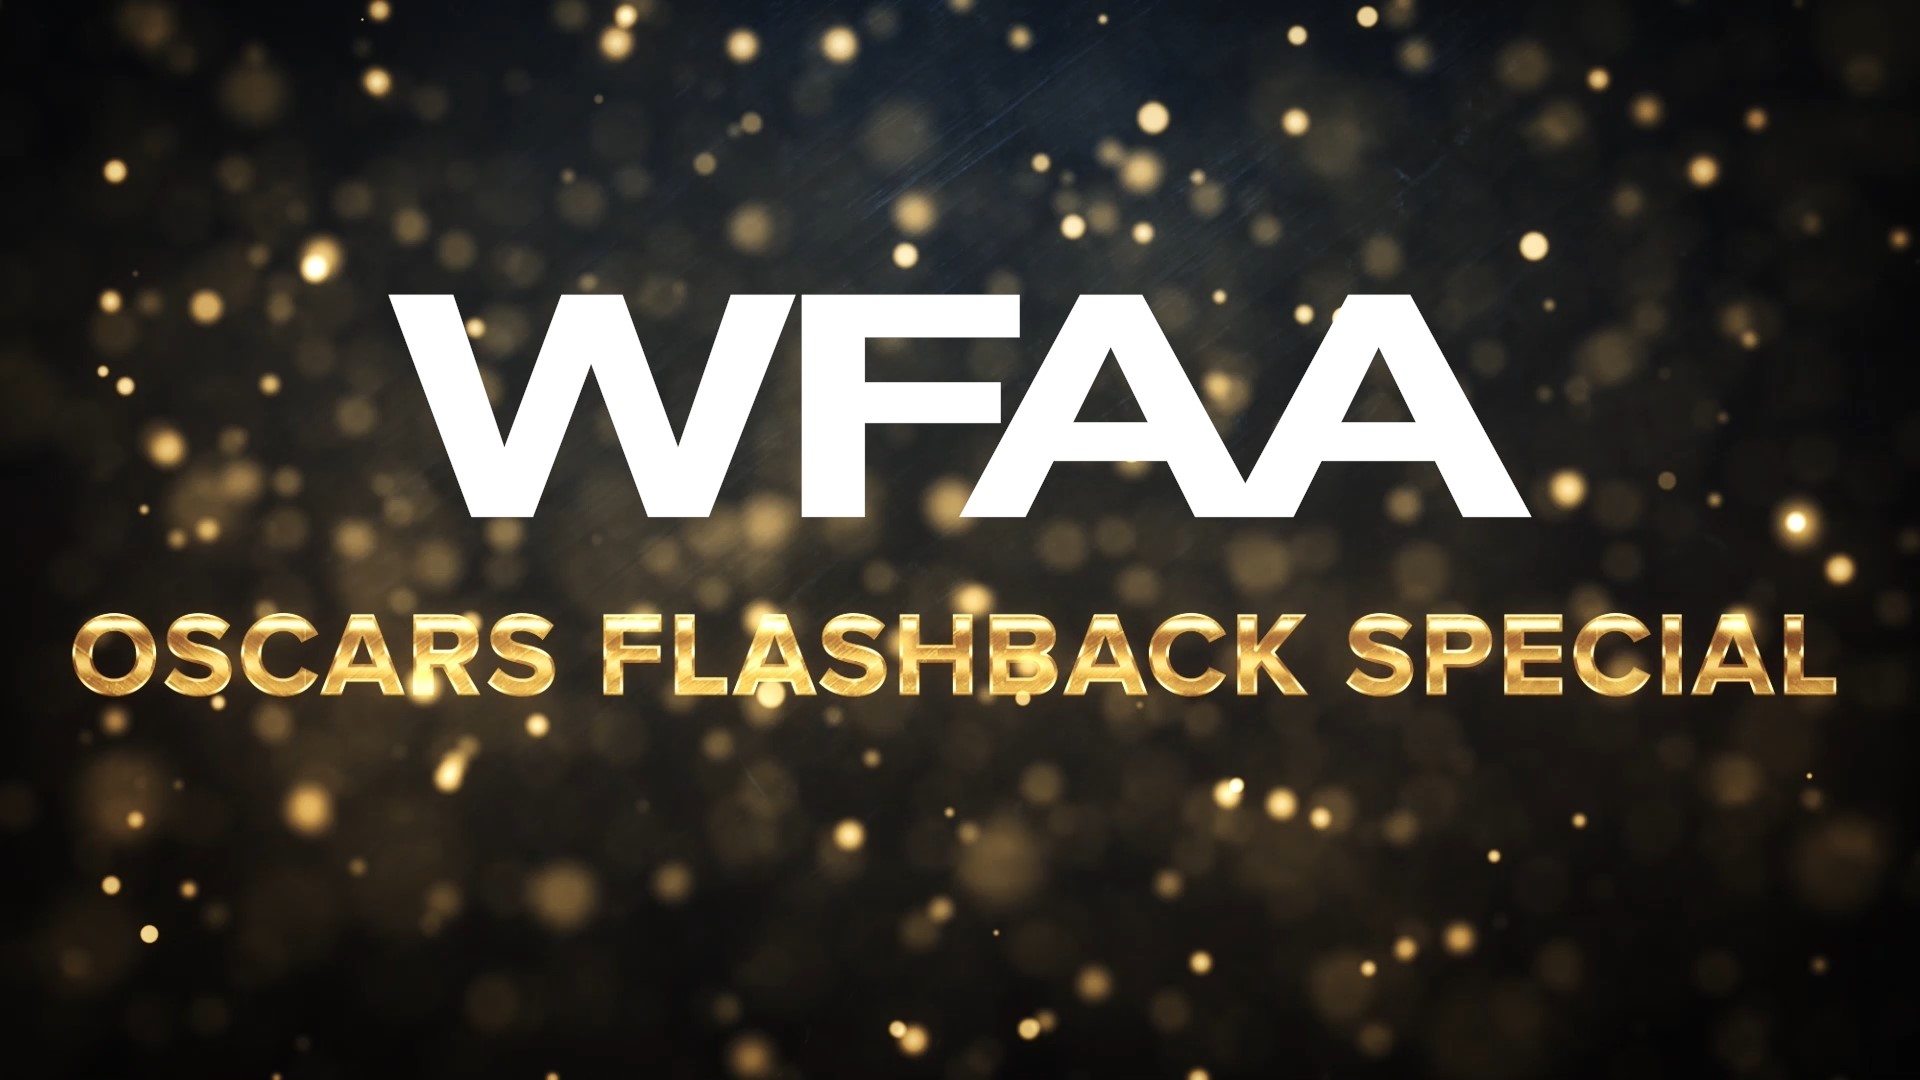 Take a look at past WFAA movie interviews from Gary Cogill and others involving films that got nominated for an Academy Award.